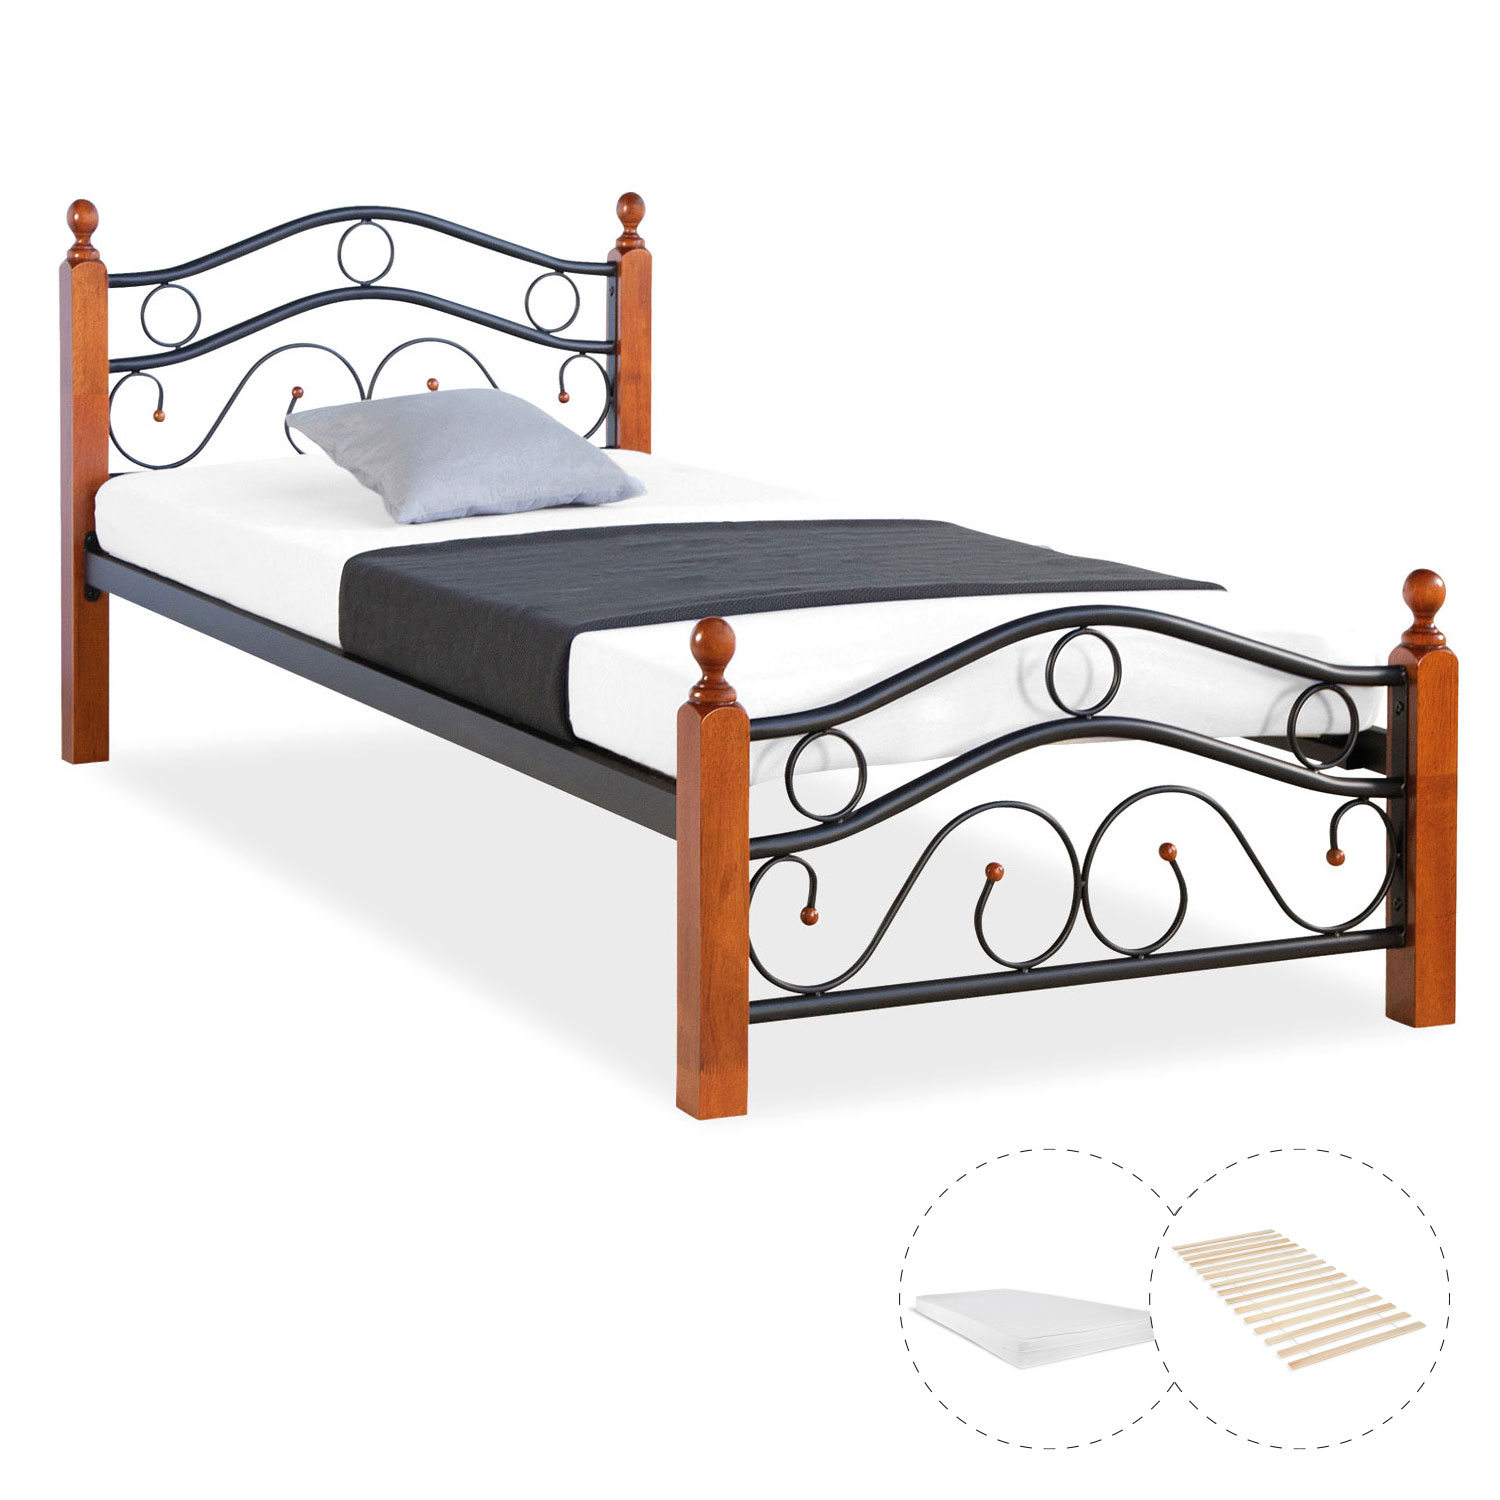 Metal Bed with Mattress Slatted Frame 90x200 cm Bedstead Black Brown Wood Single Daybed